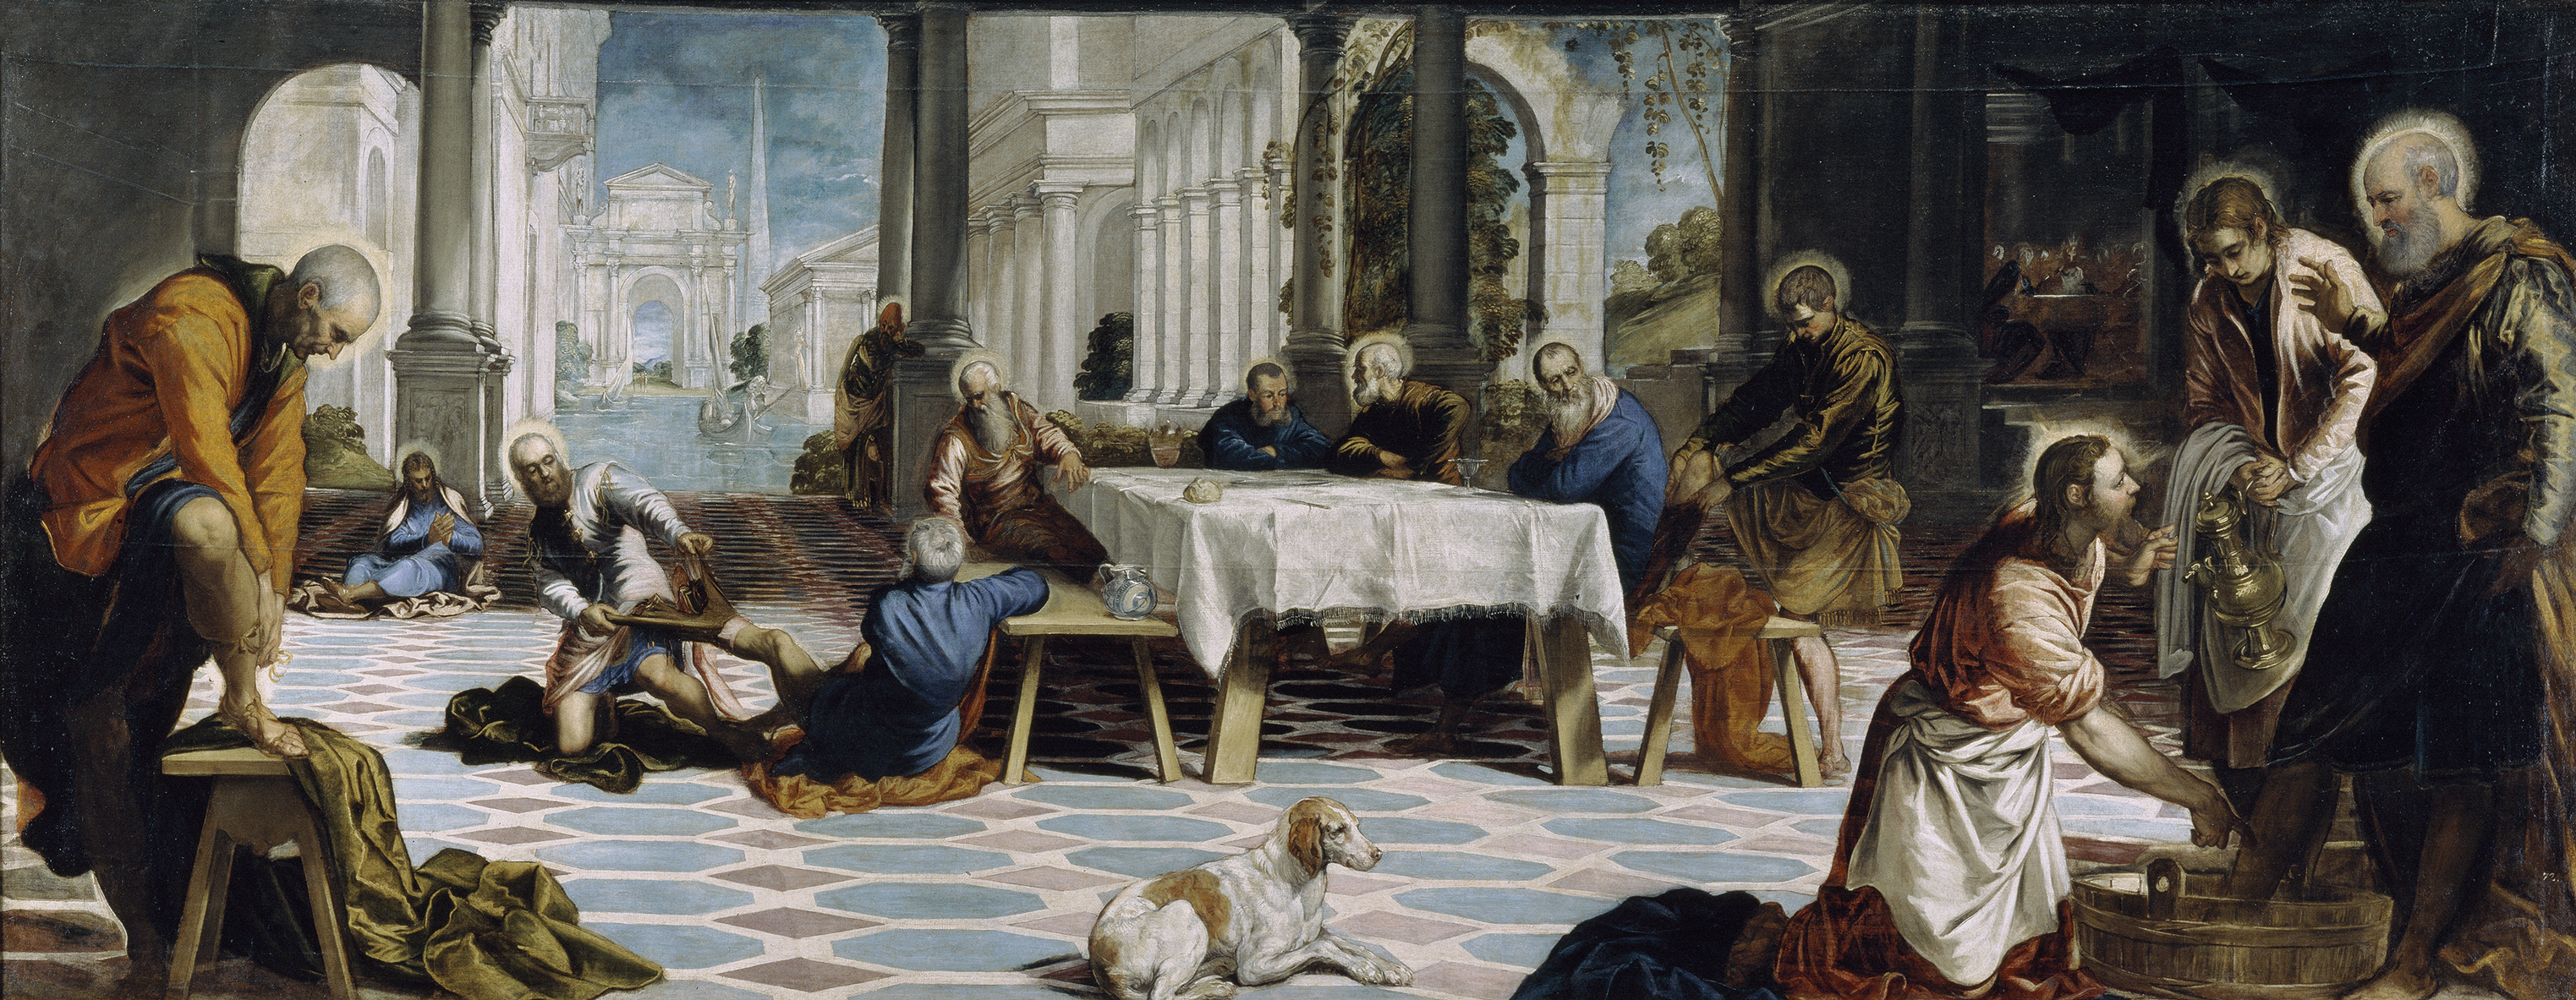 TINTORETTO WASHING OF THE FEET